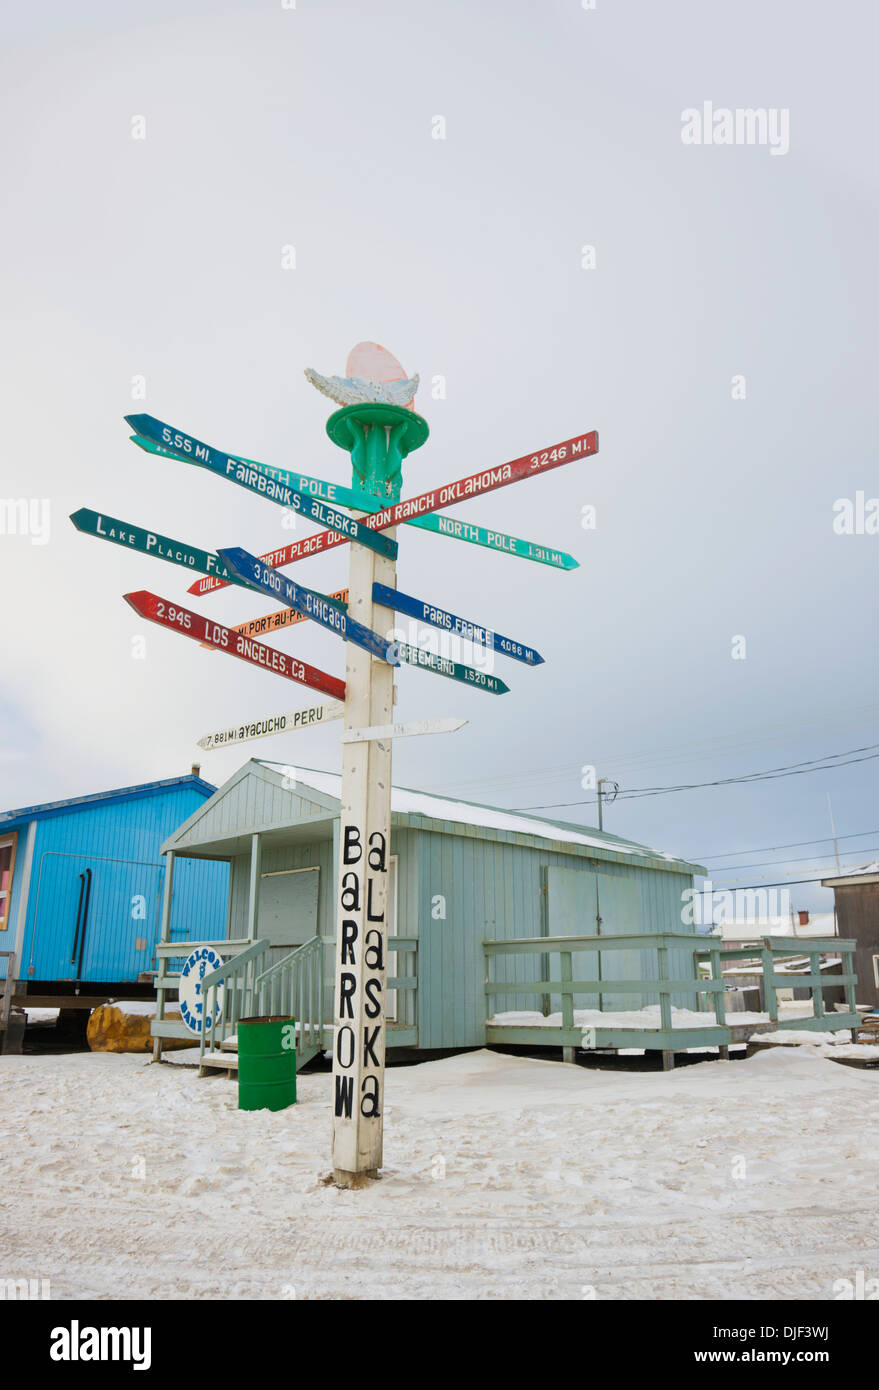 Mileage signpost next to the airport;Barrow alaska united states of america Stock Photo